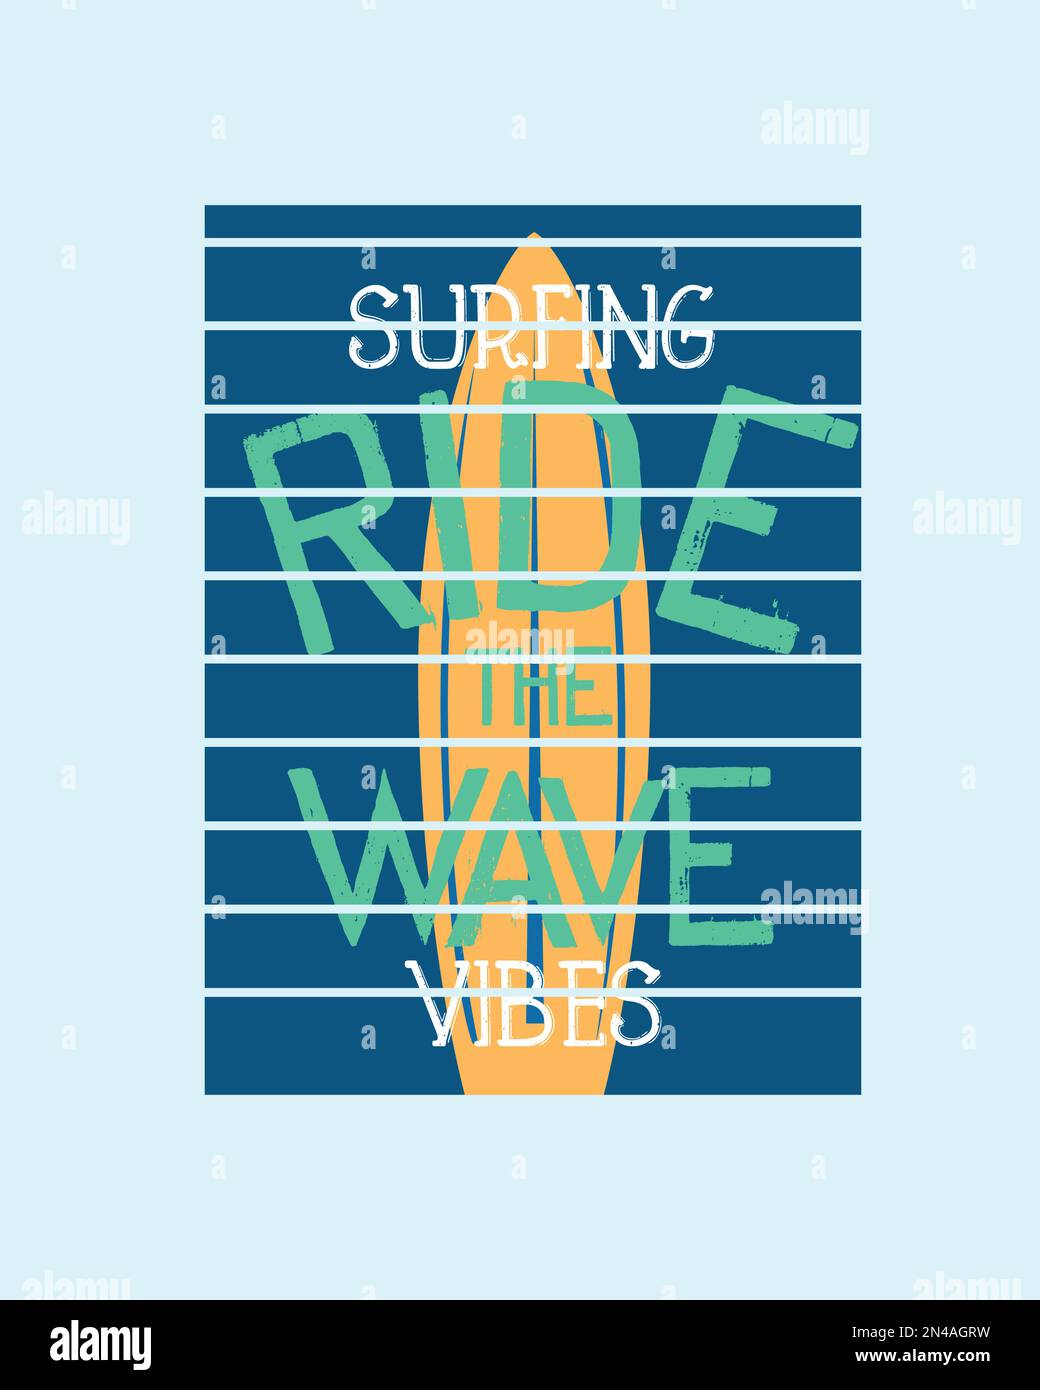 Stock Images Alamy designs Surfing Vector -